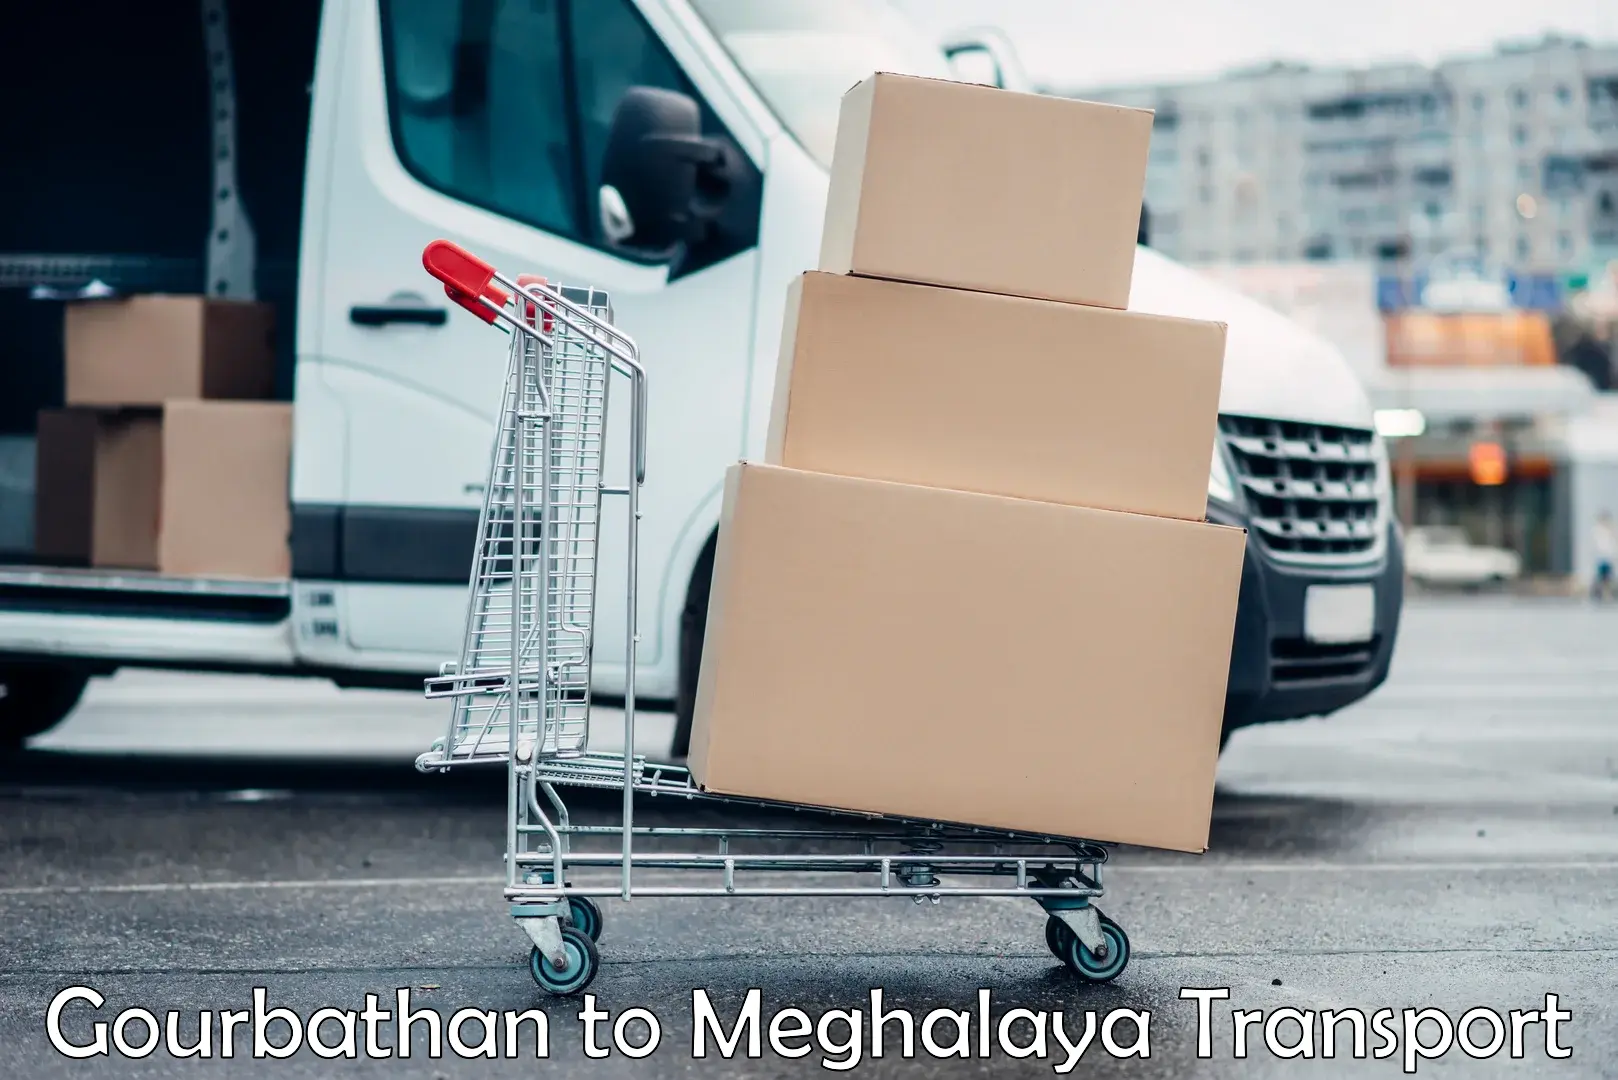 Cargo transport services in Gourbathan to Meghalaya